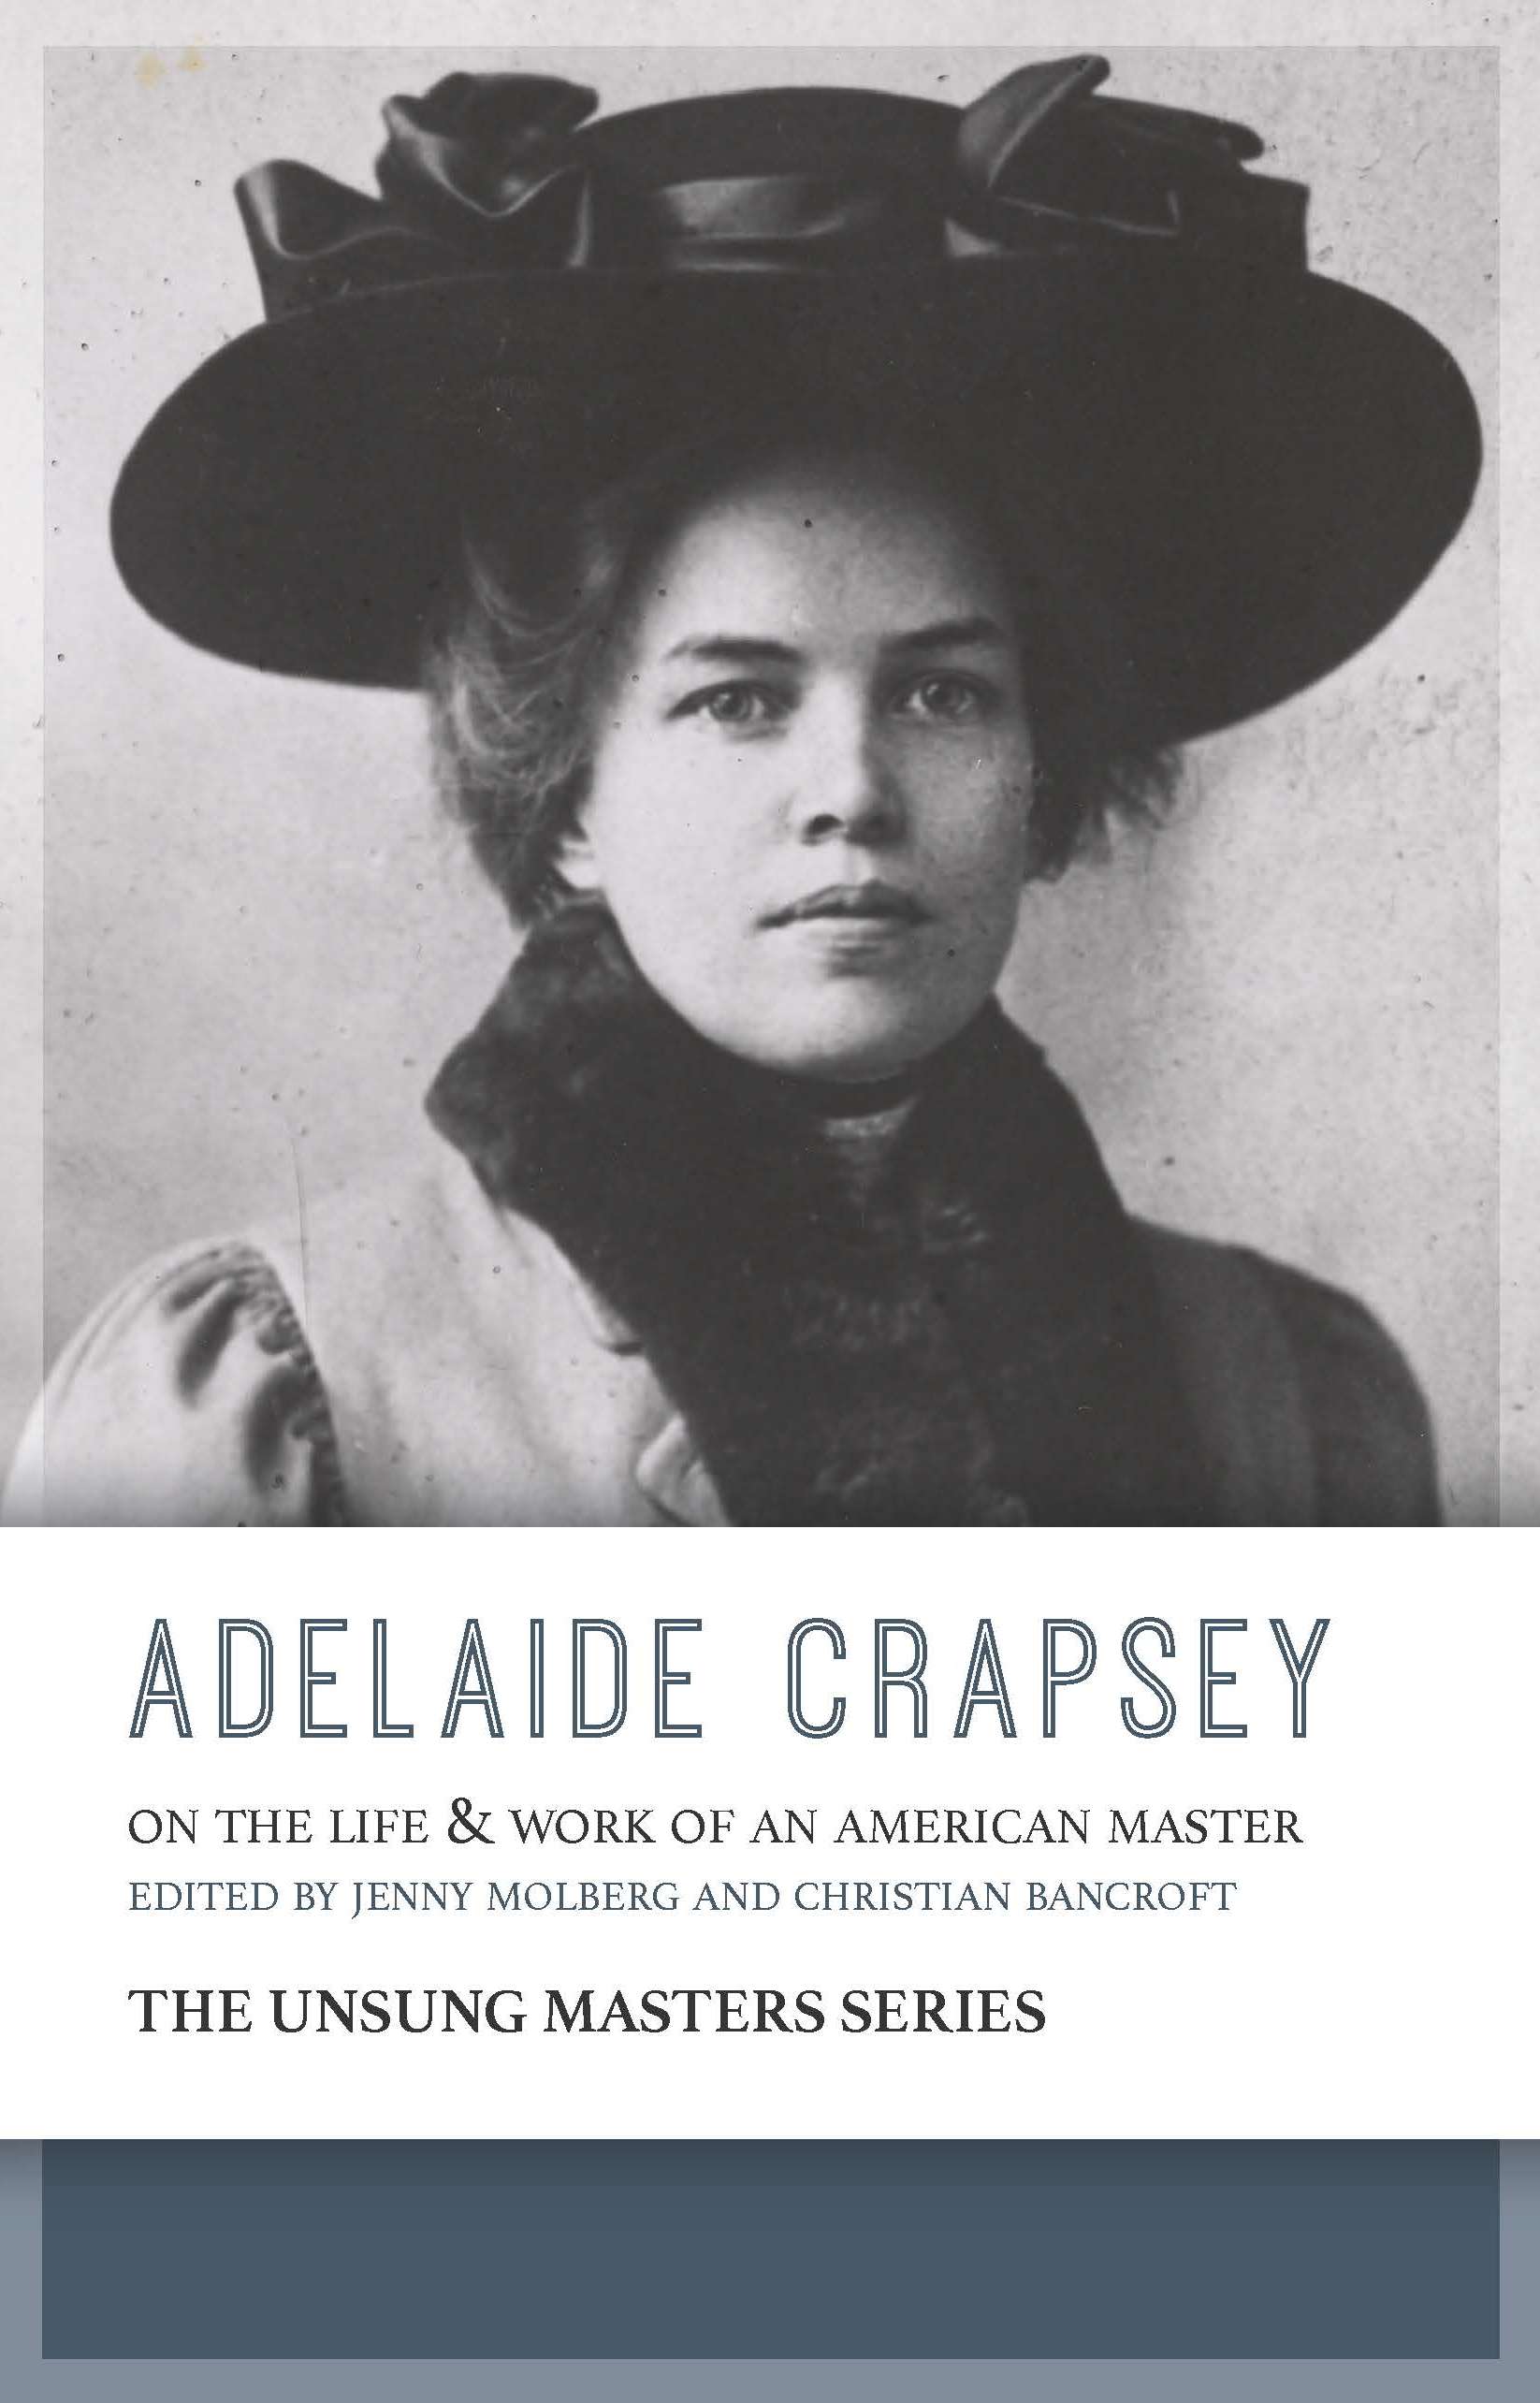 Adelaide Crapsey: On the Life & Work of an American Master